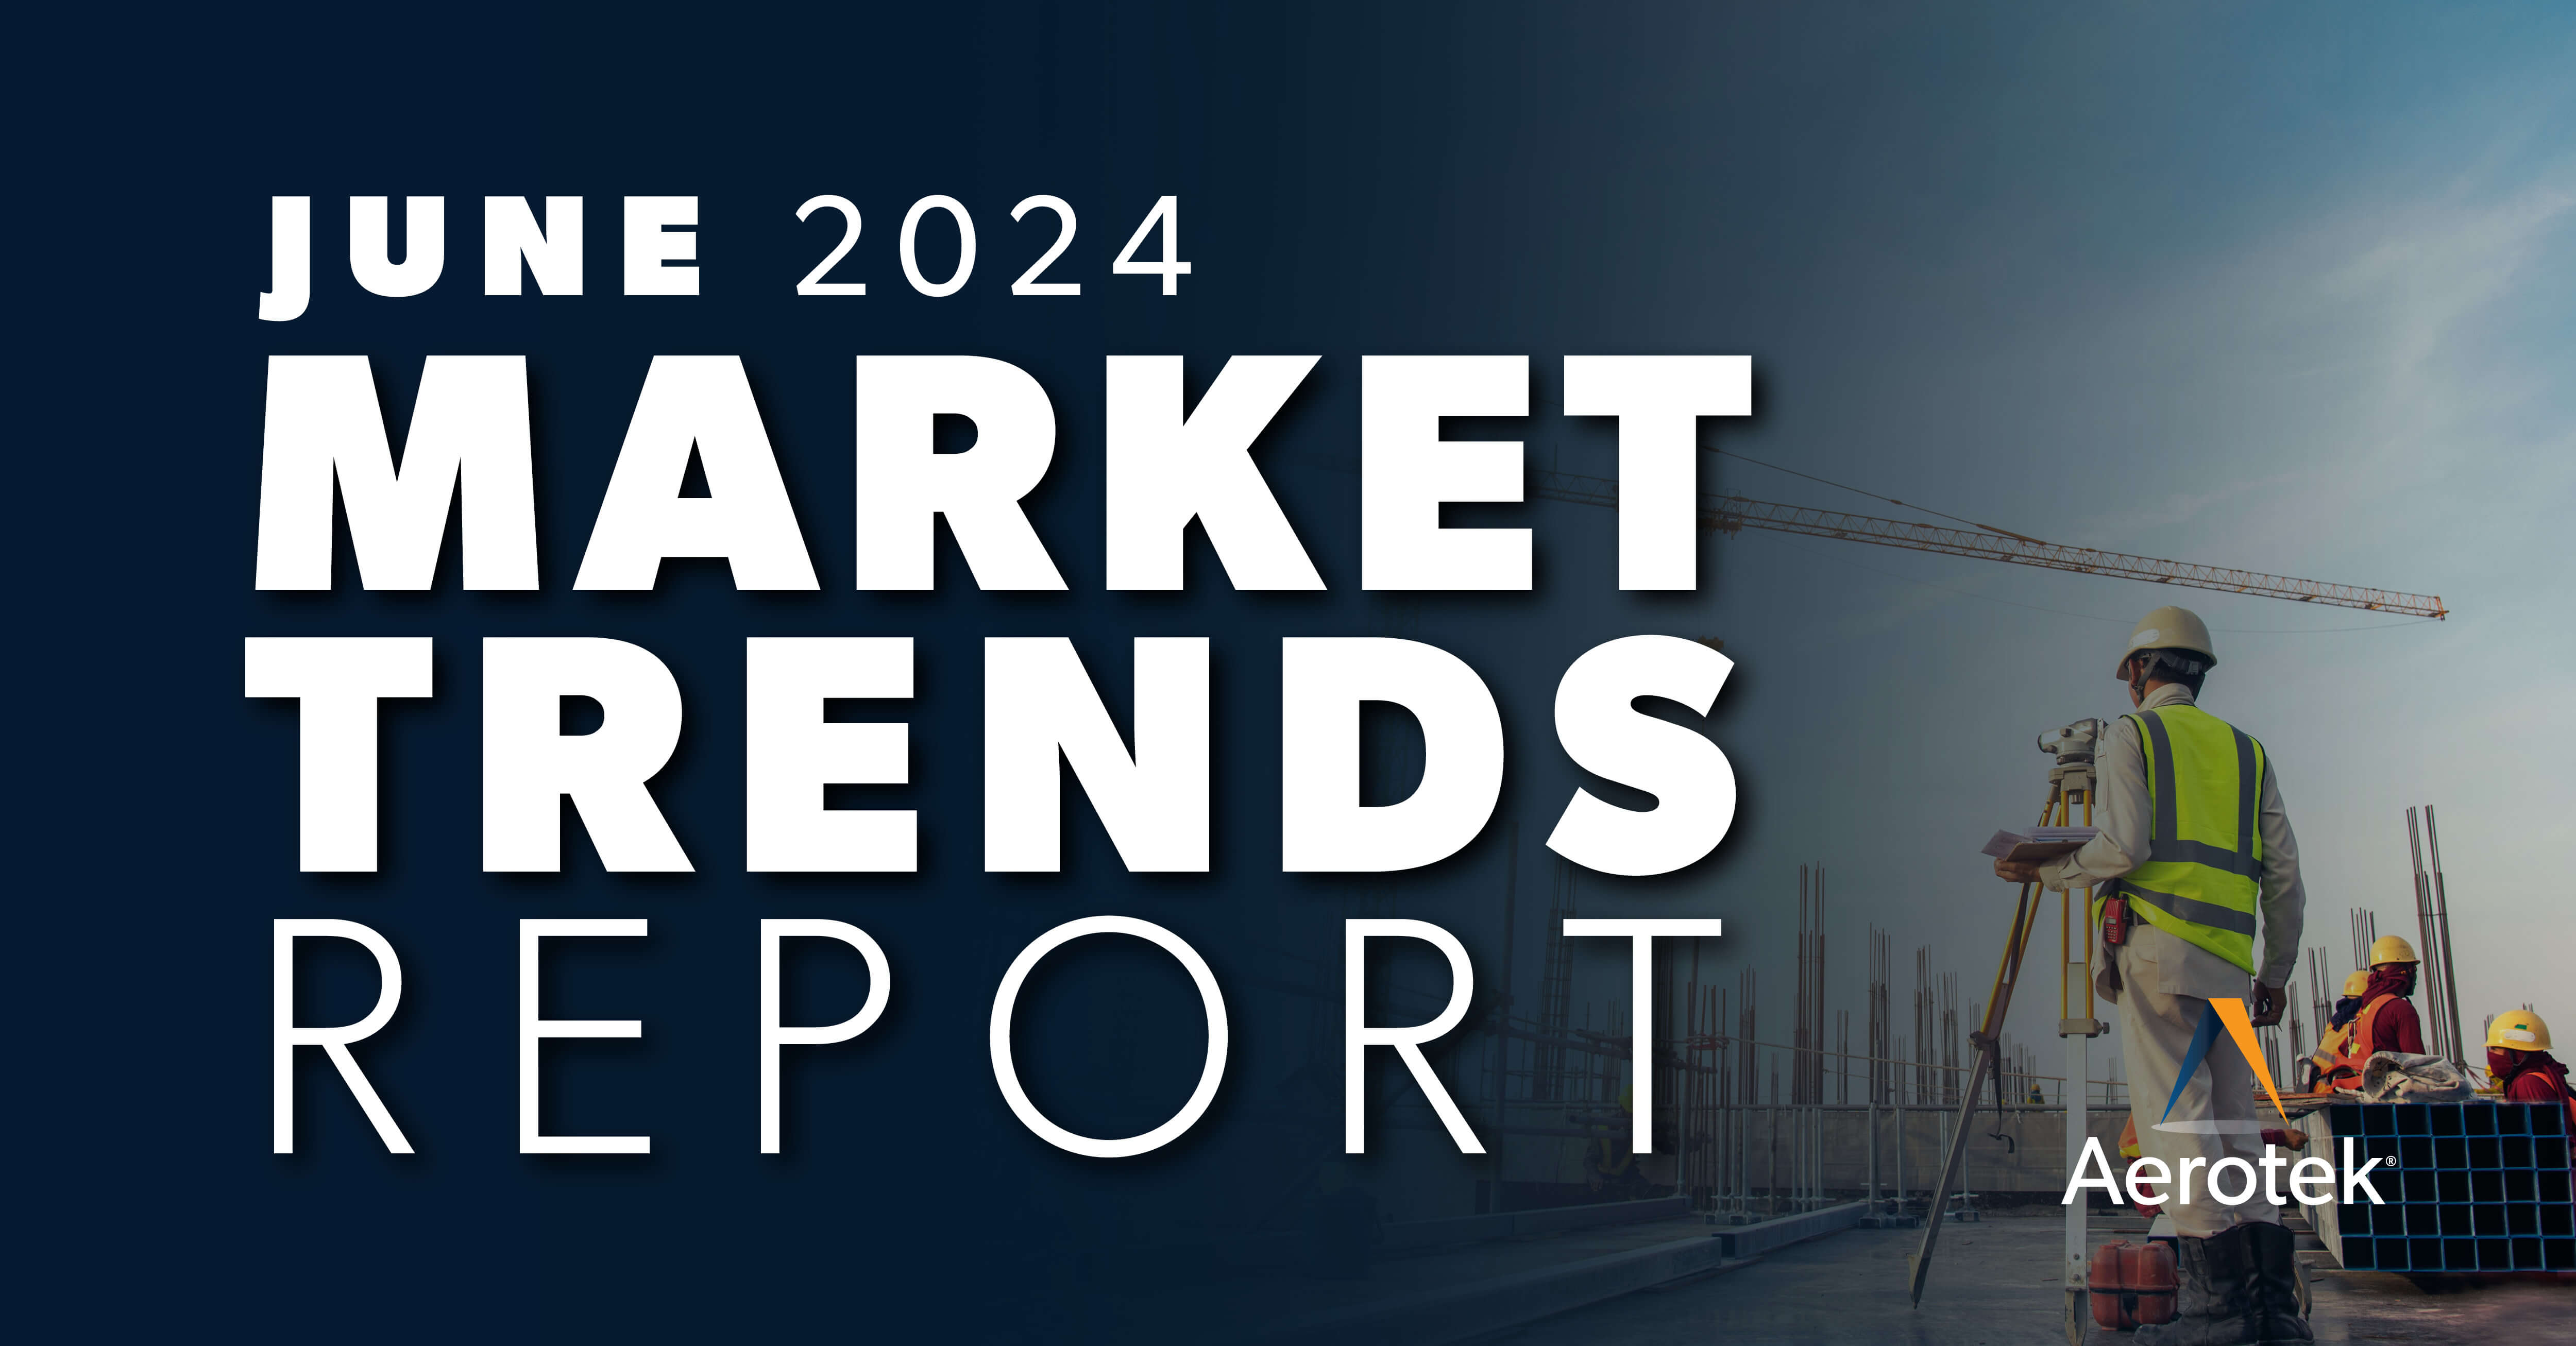 The caption "June 2024 Market Trends Report" overlays an image of a male construction worker in safety gear looking at  a large crane.